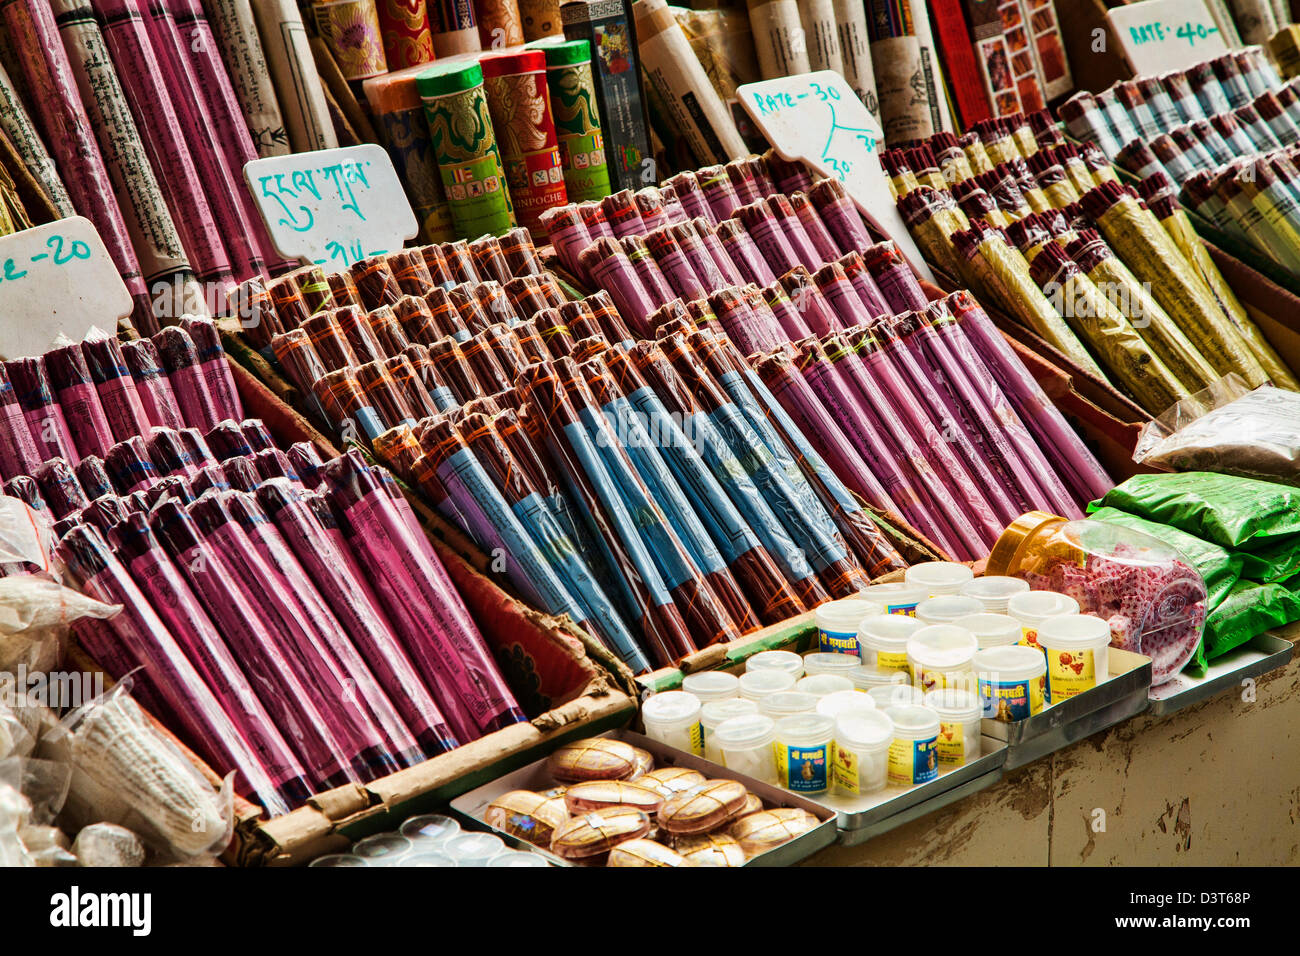 Packages of incense for sale at the open market in Thimphu, Bhutan. Stock Photo